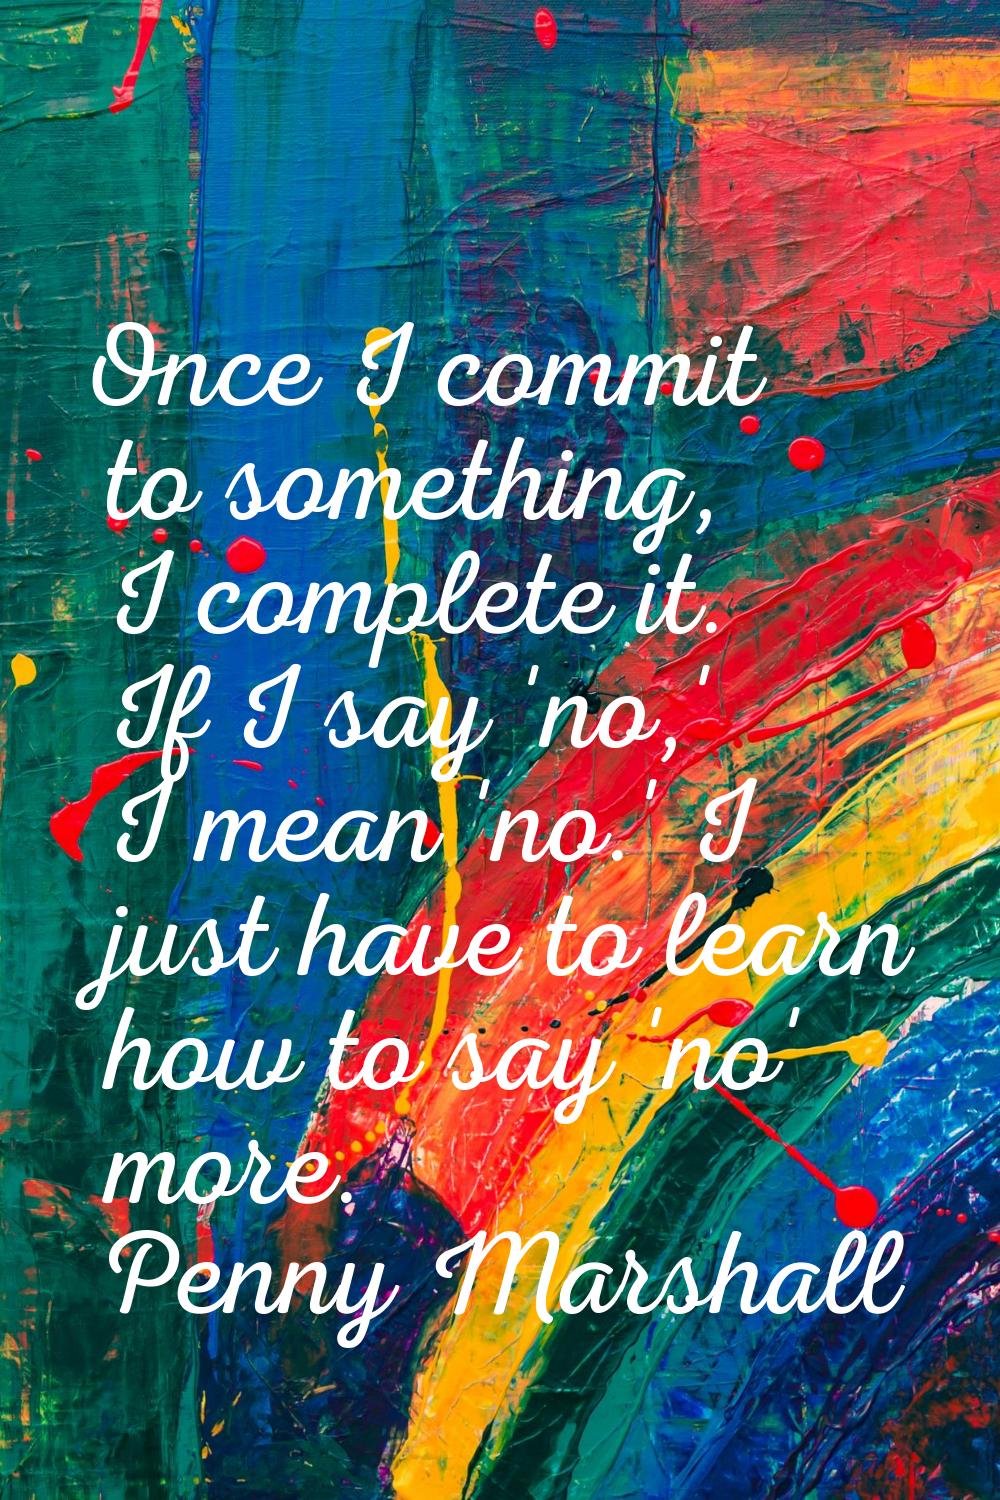 Once I commit to something, I complete it. If I say 'no,' I mean 'no.' I just have to learn how to 